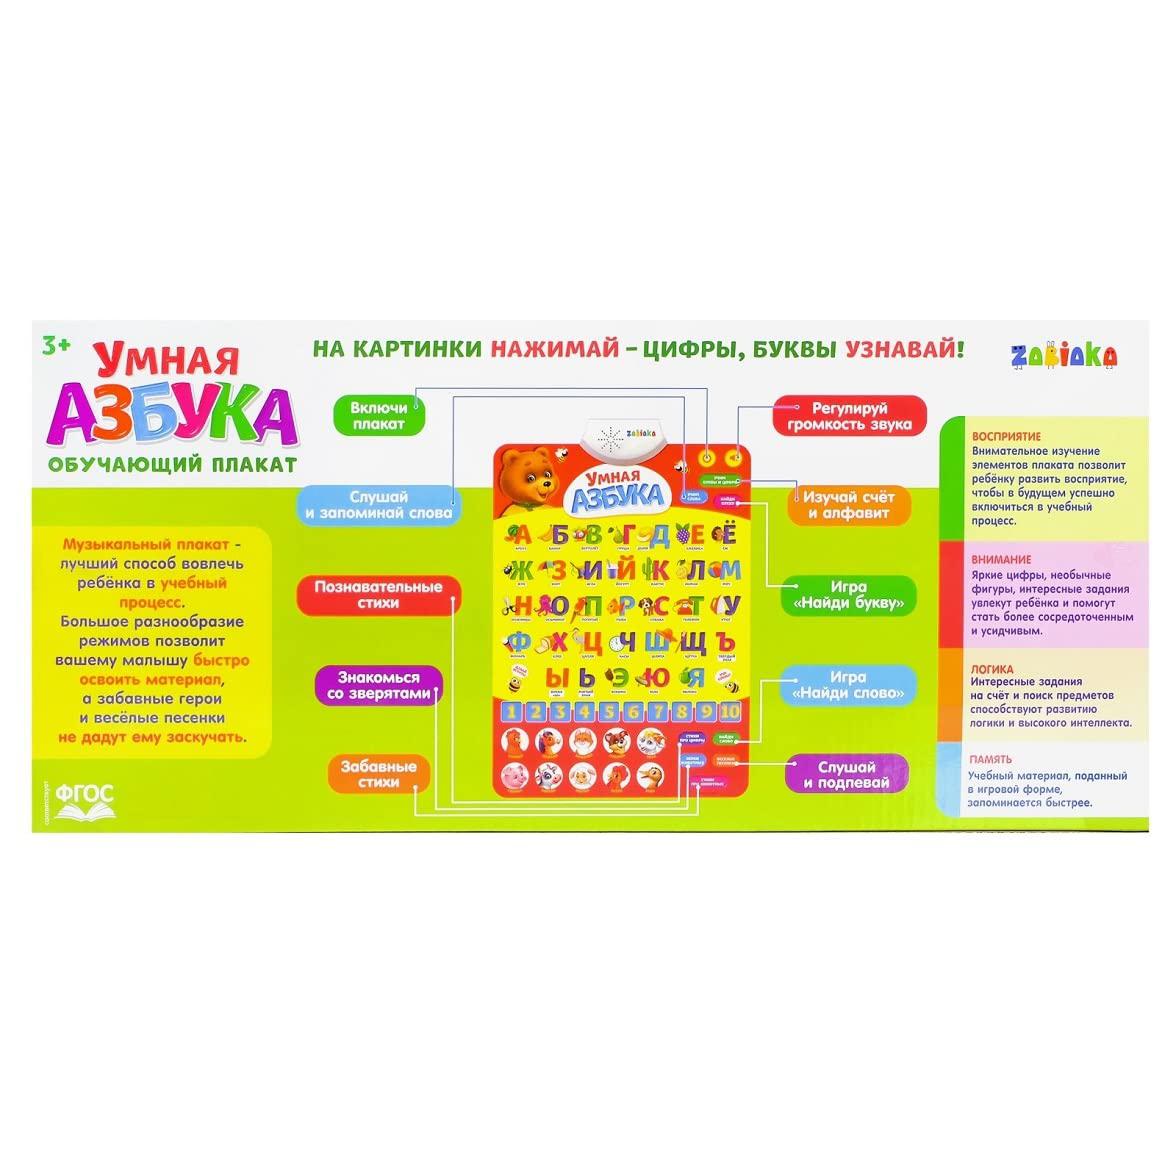 AEVVV russian alphabet poster to learn cyrillic letters and numbers - russian language learning toys - russian azbuka chart - learn